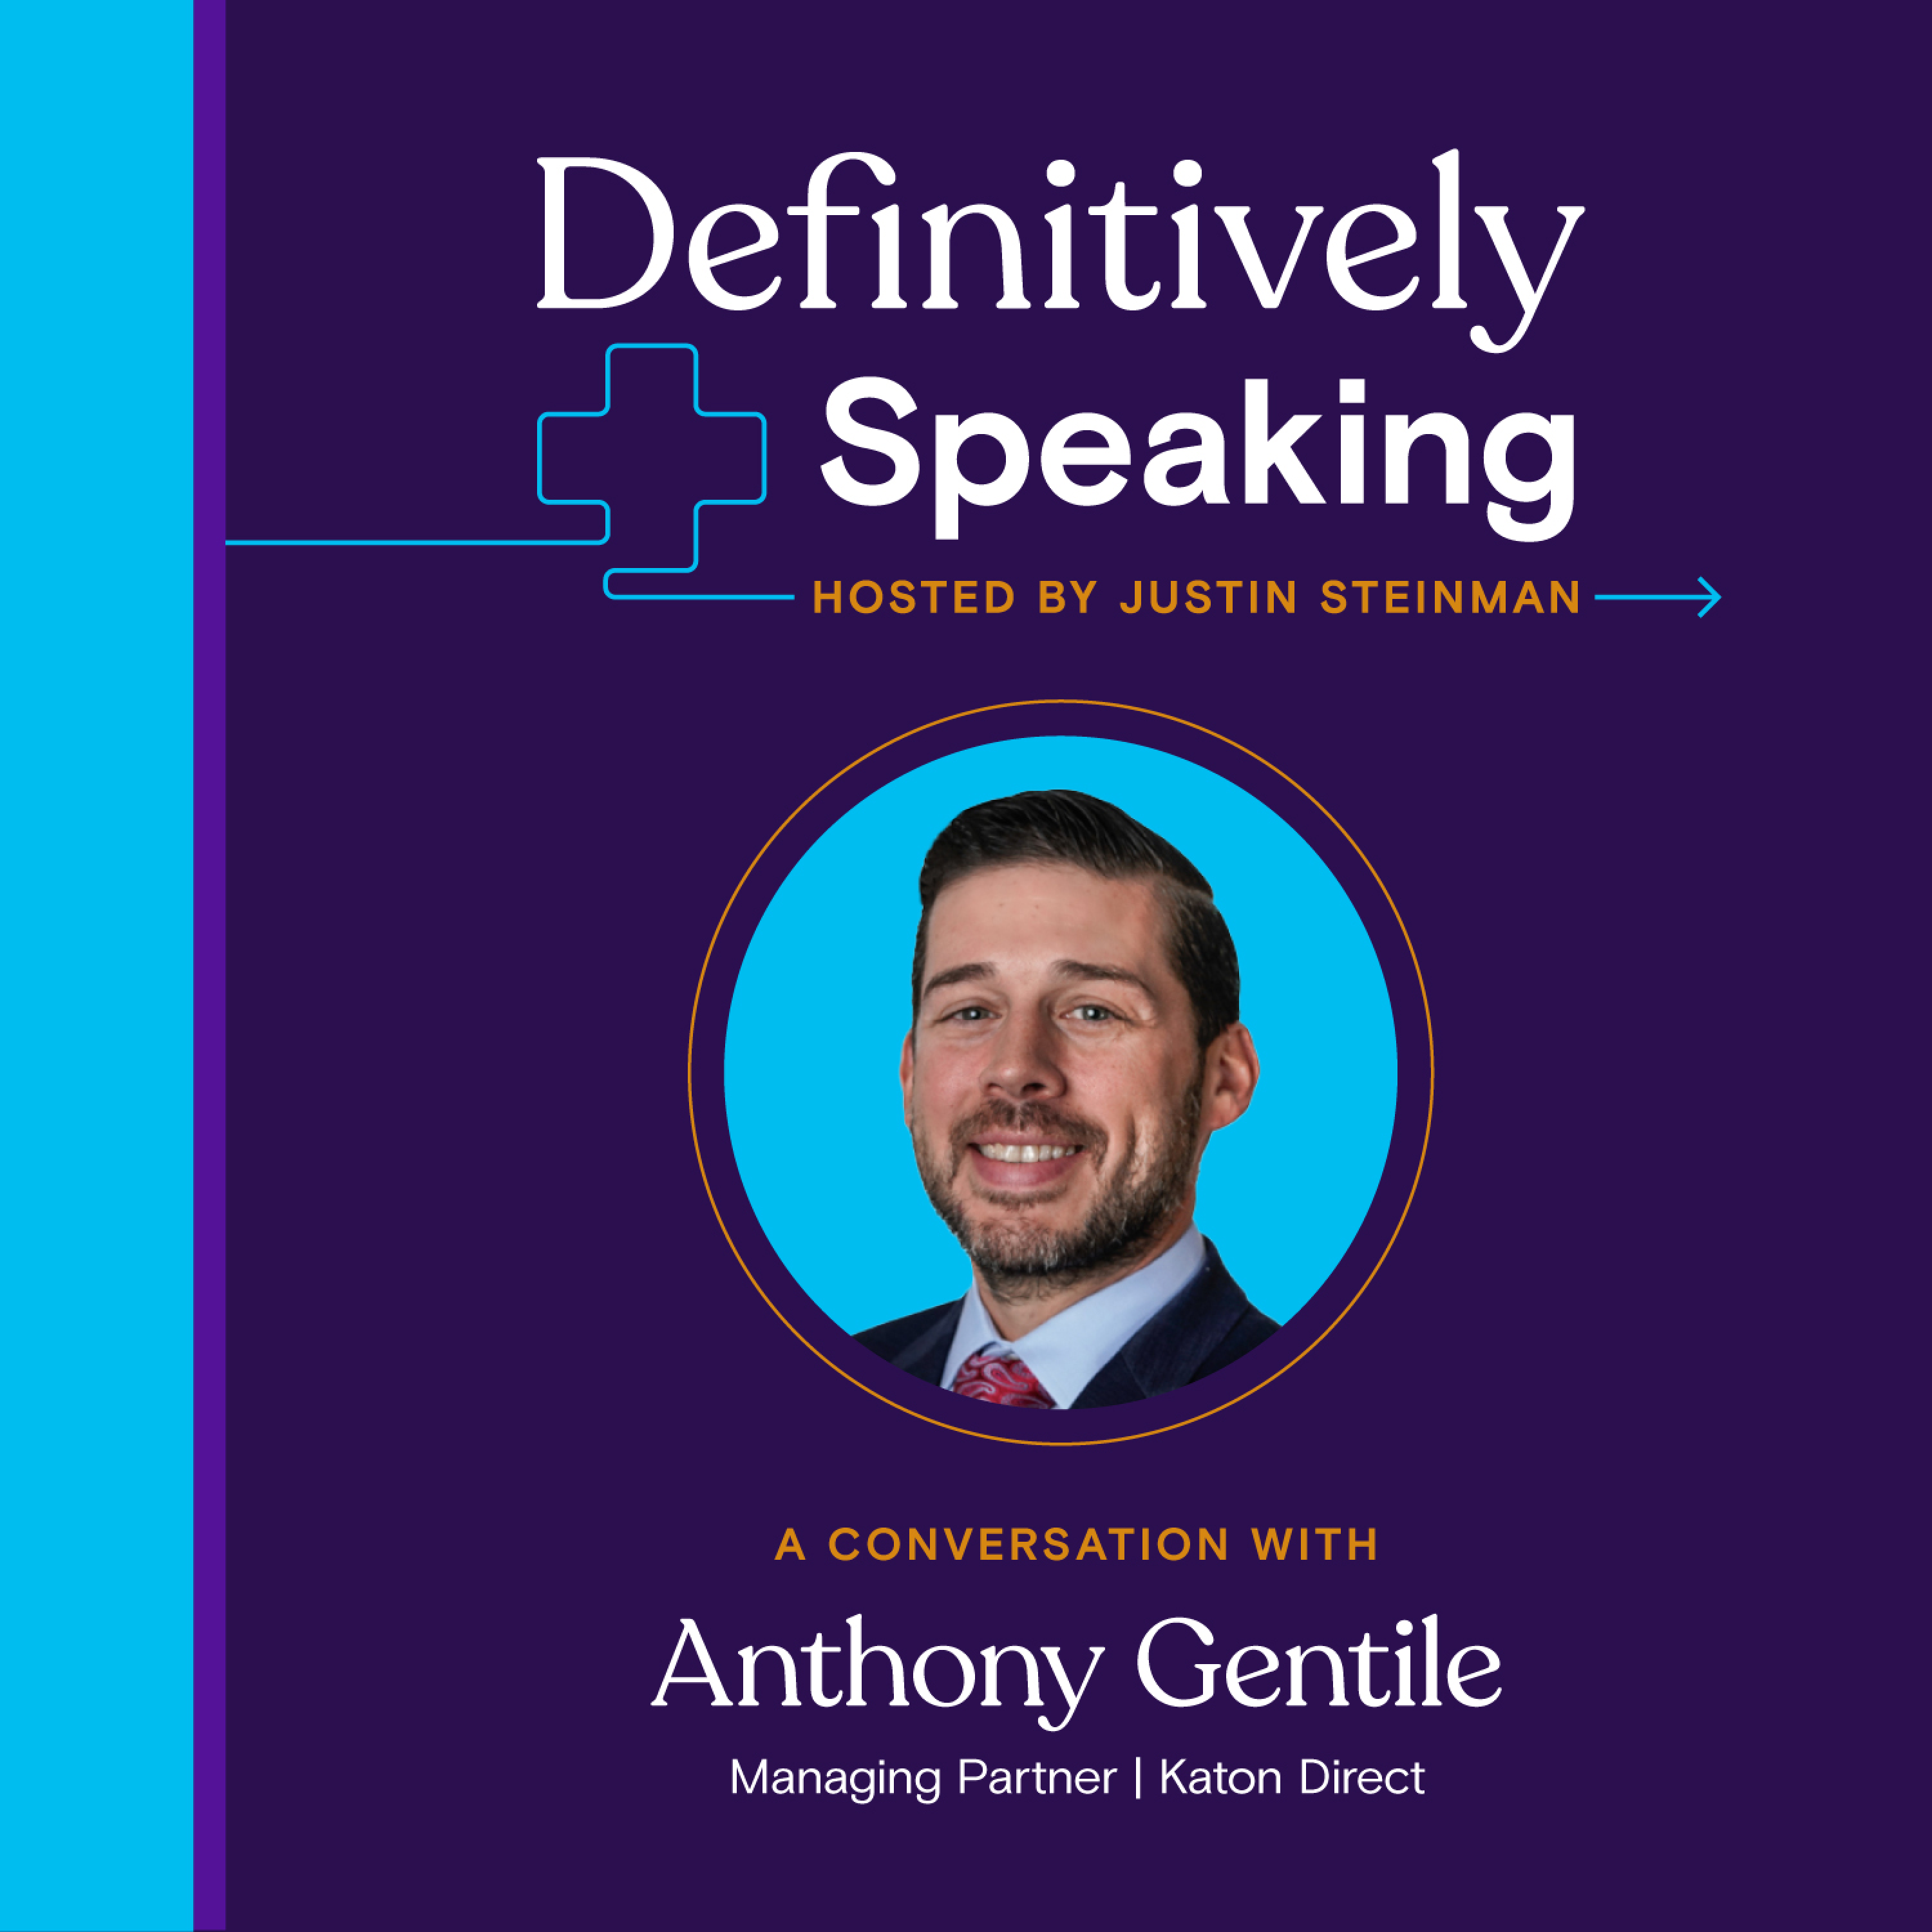 Episode 15: Clinical recruiting is a buyer’s market (so act like it!)—Best practices for healthcare staffing with Anthony Gentile of Katon Direct